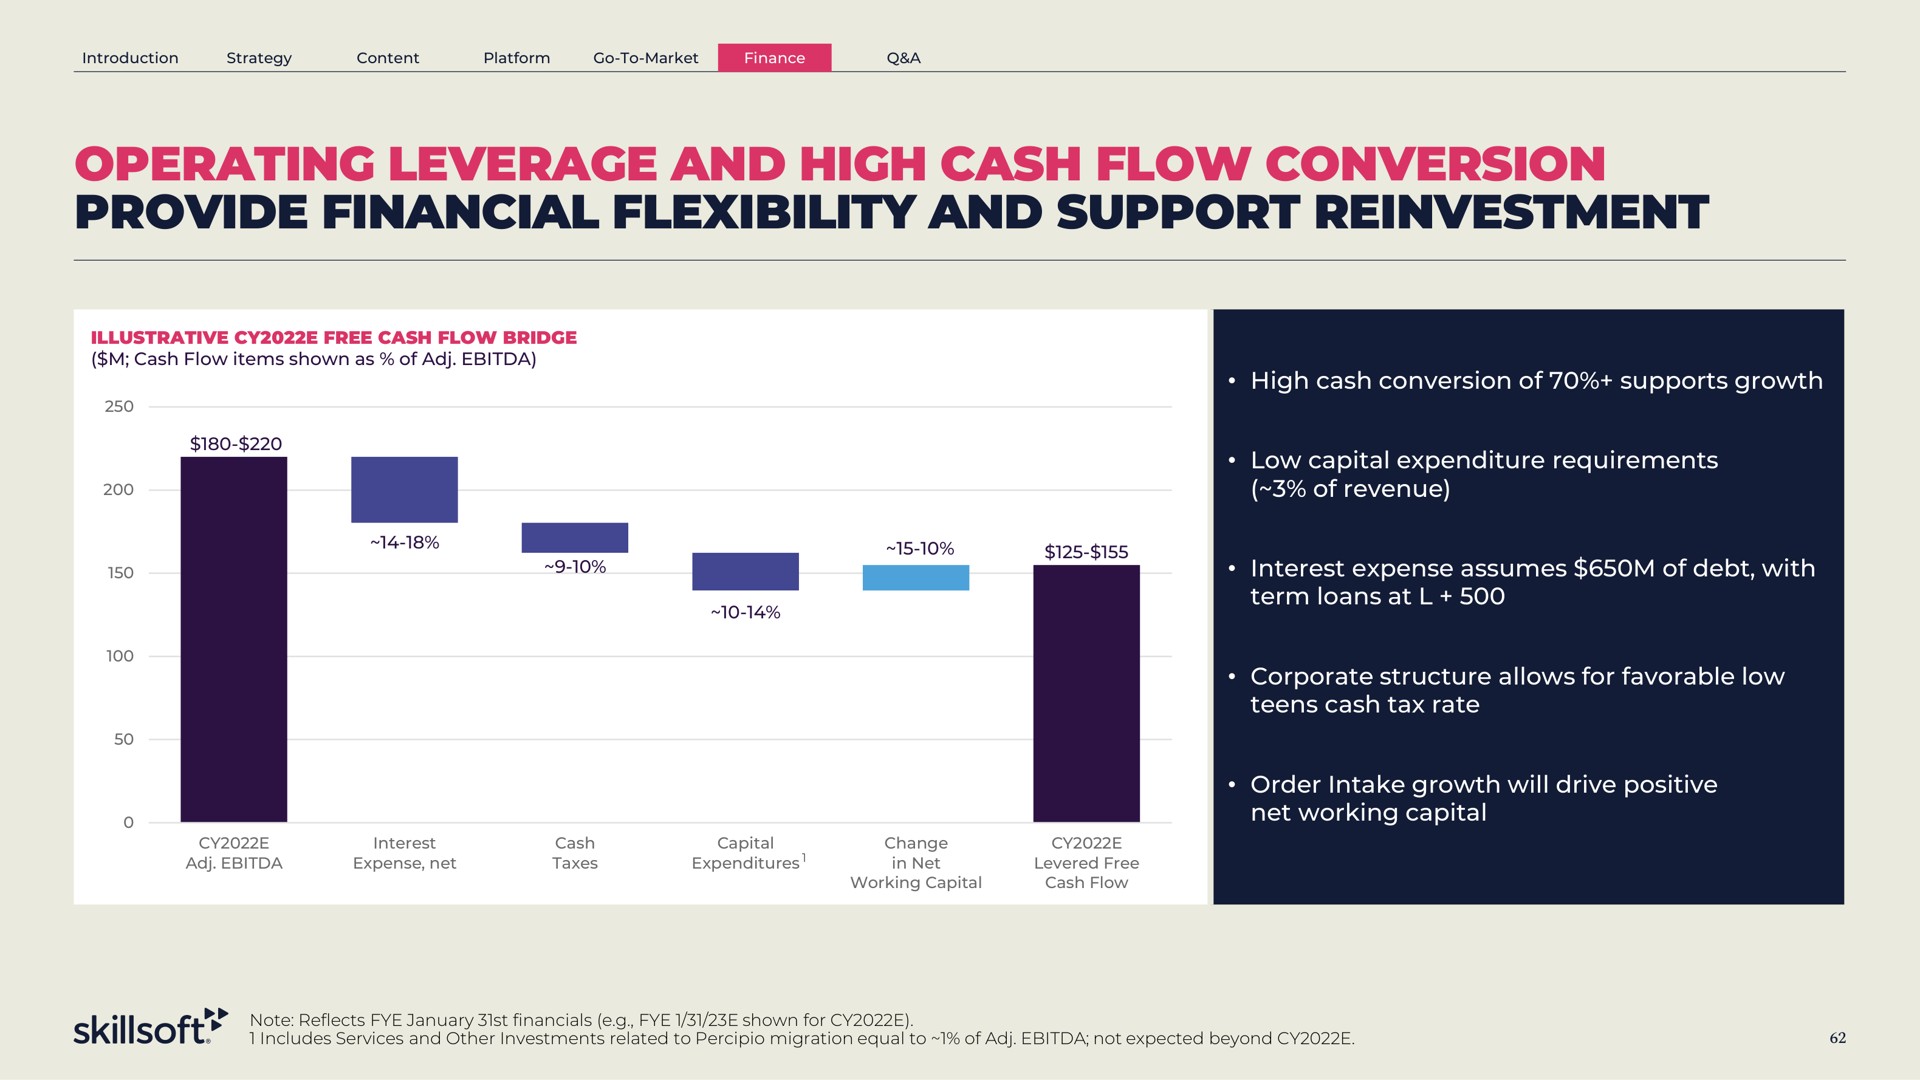 operating leverage and high cash flow conversion provide financial flexibility and support reinvestment | Skillsoft